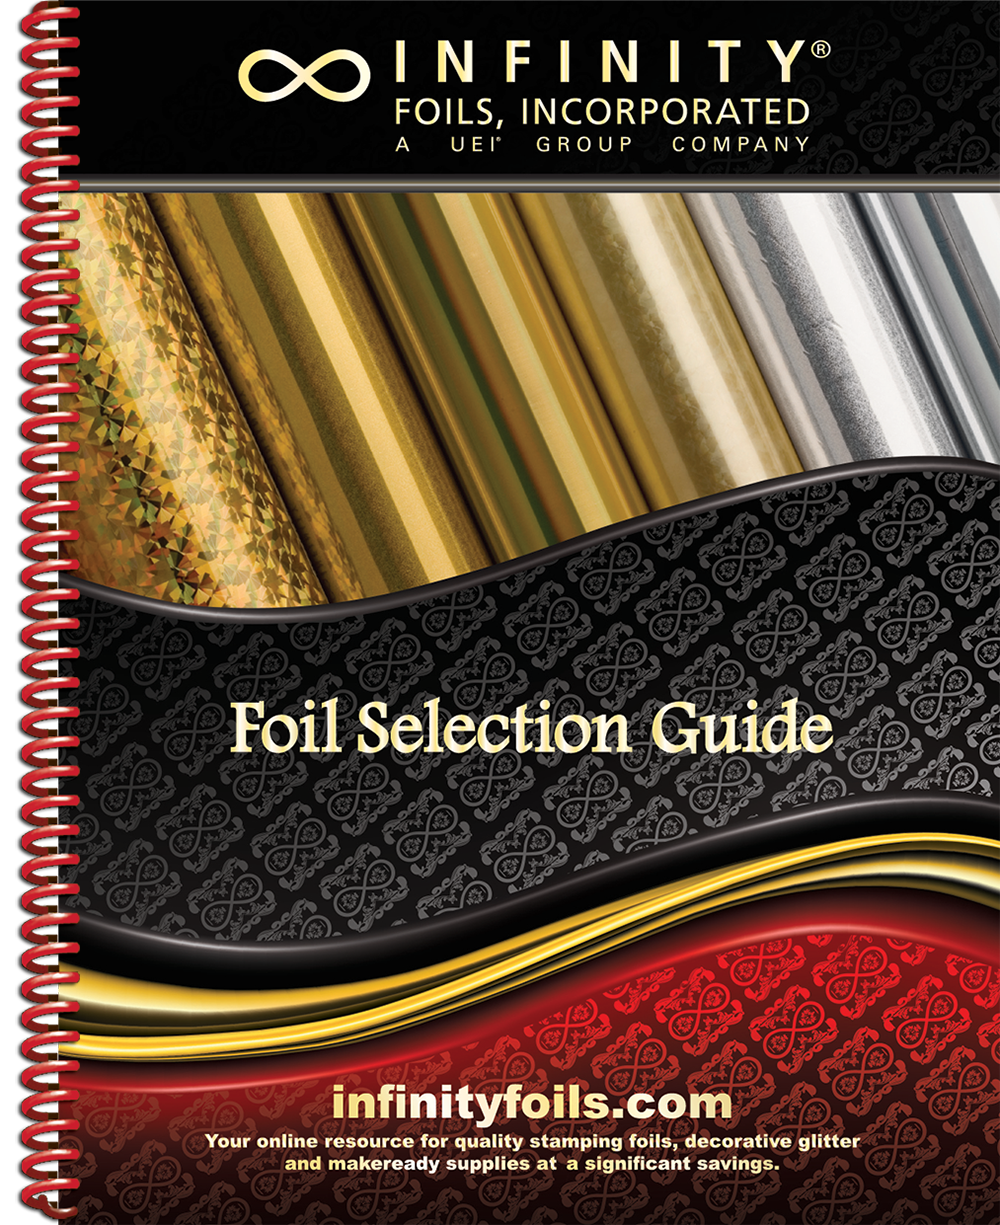 Infinity Foils, Incorporated Announces their New Foil Selection Guide